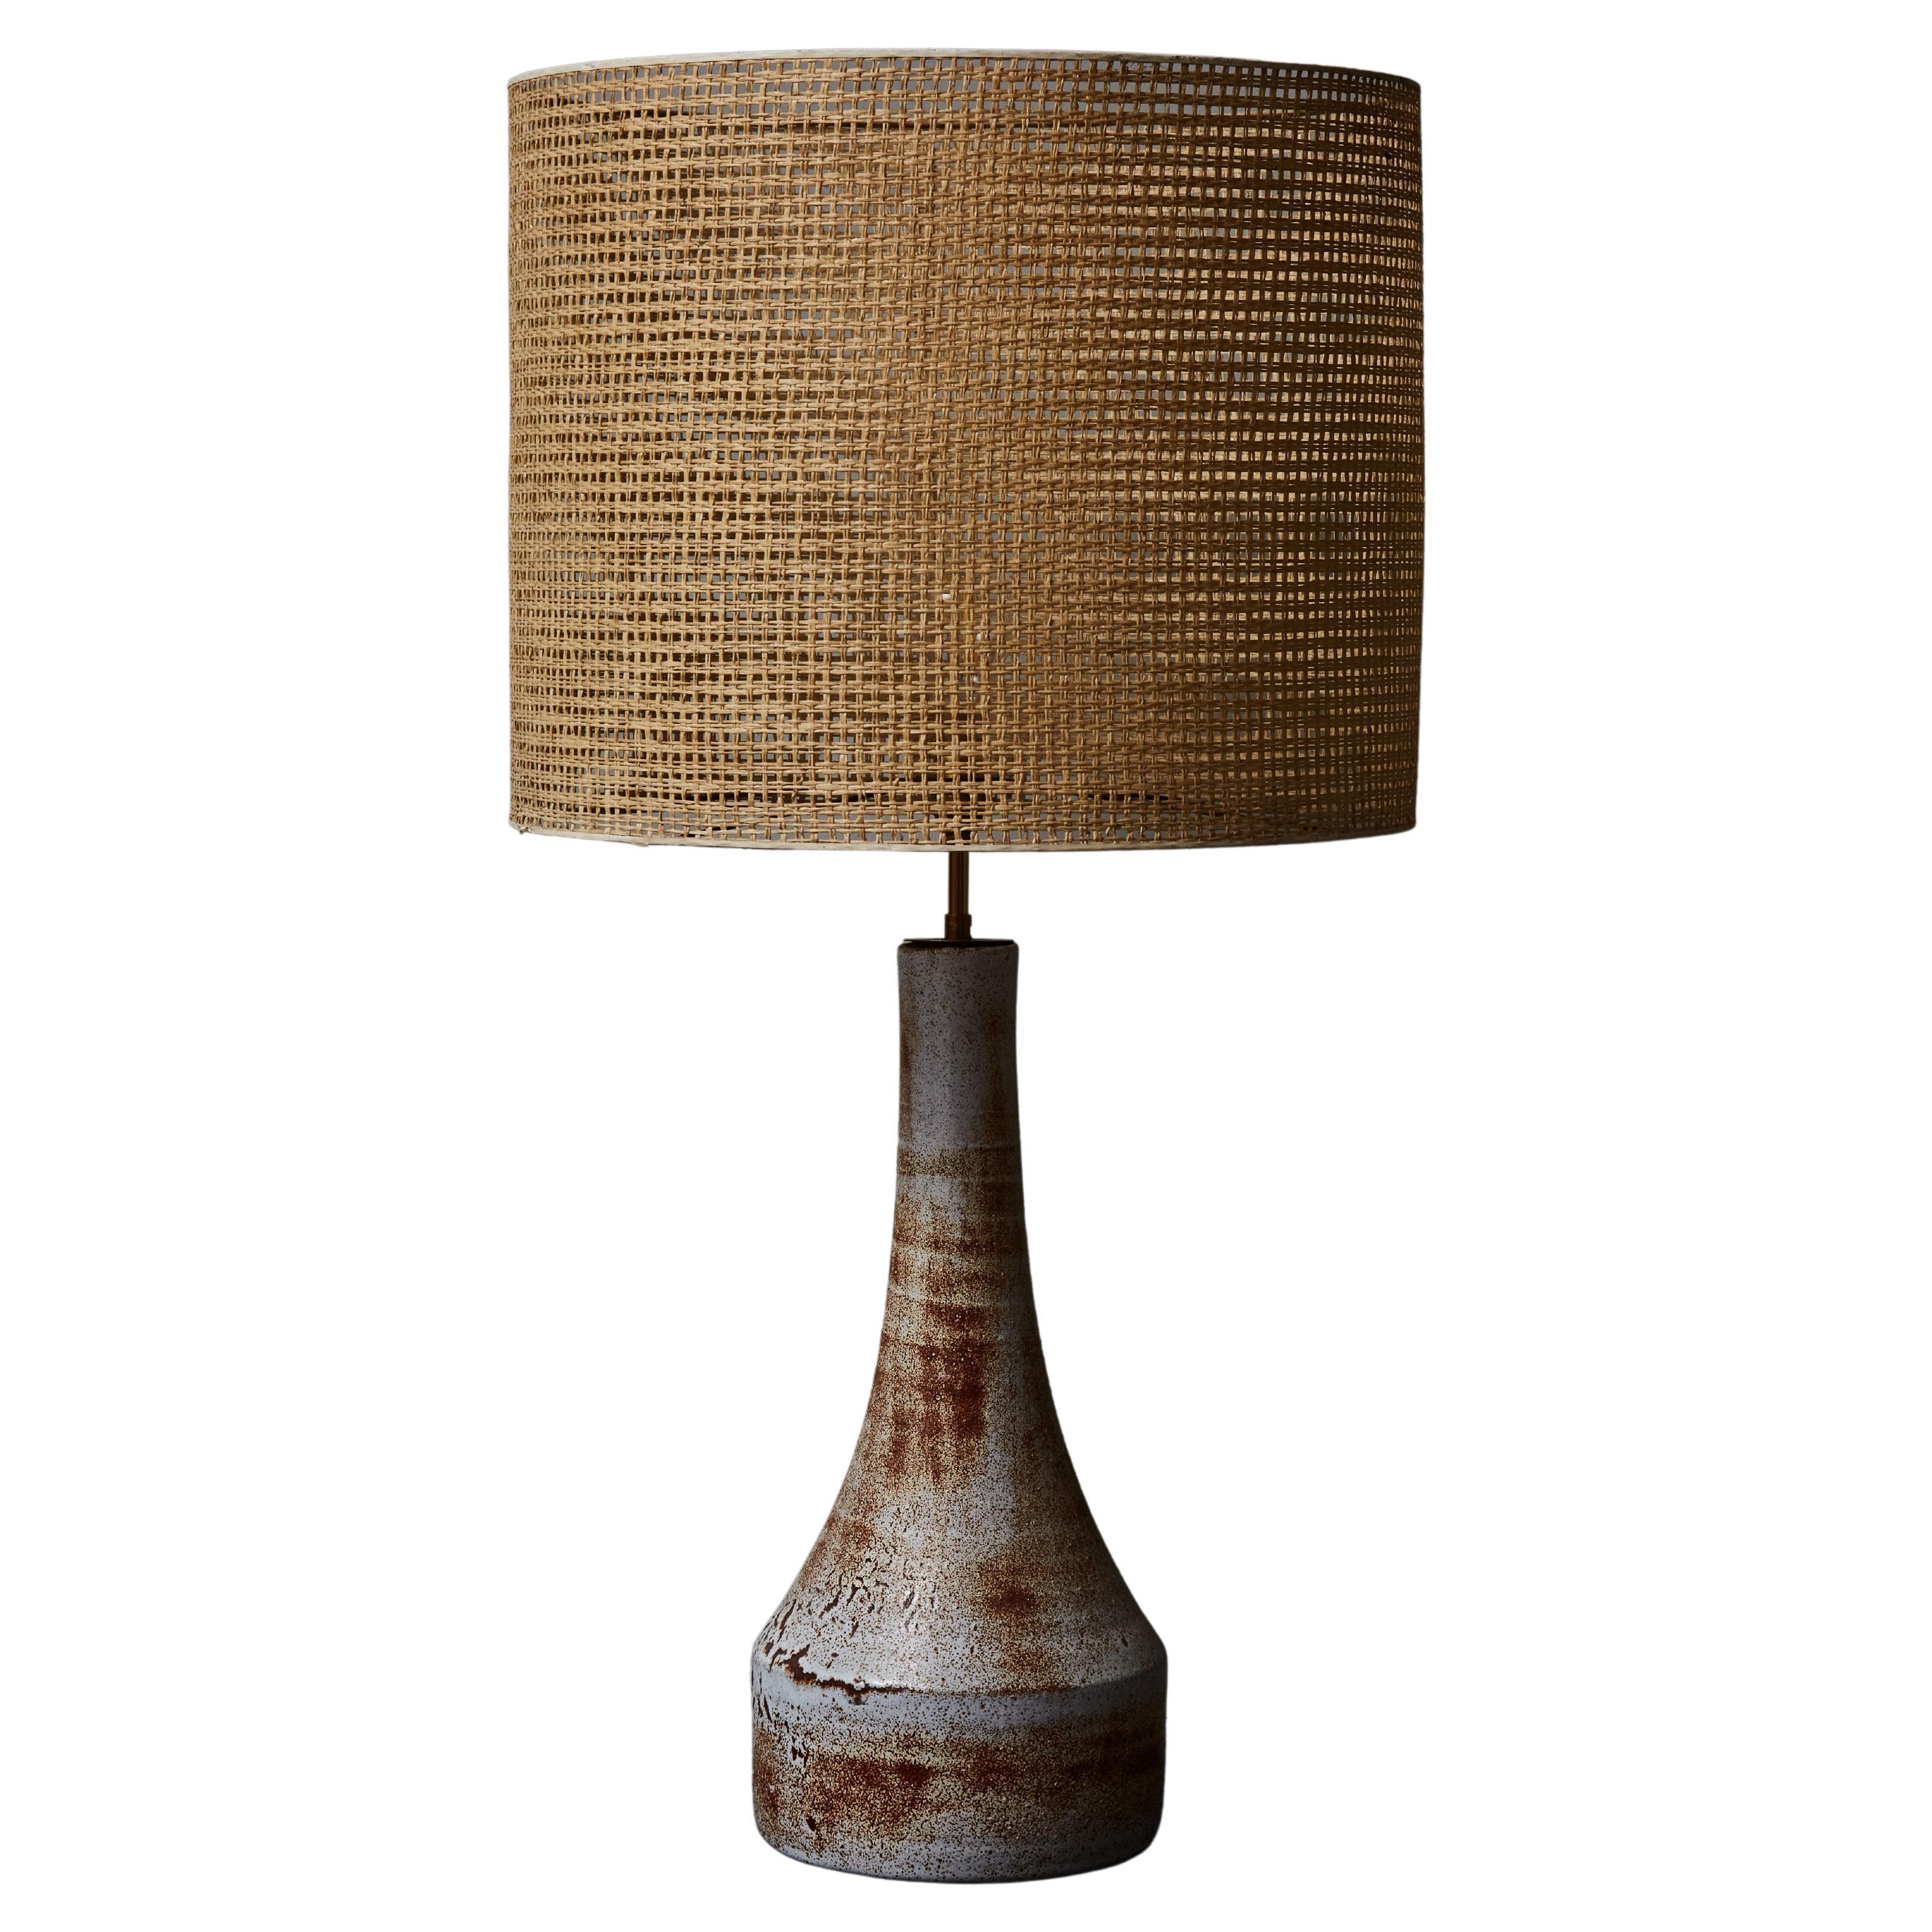 Tall Glazed Ceramic Table Lamp by Accolay